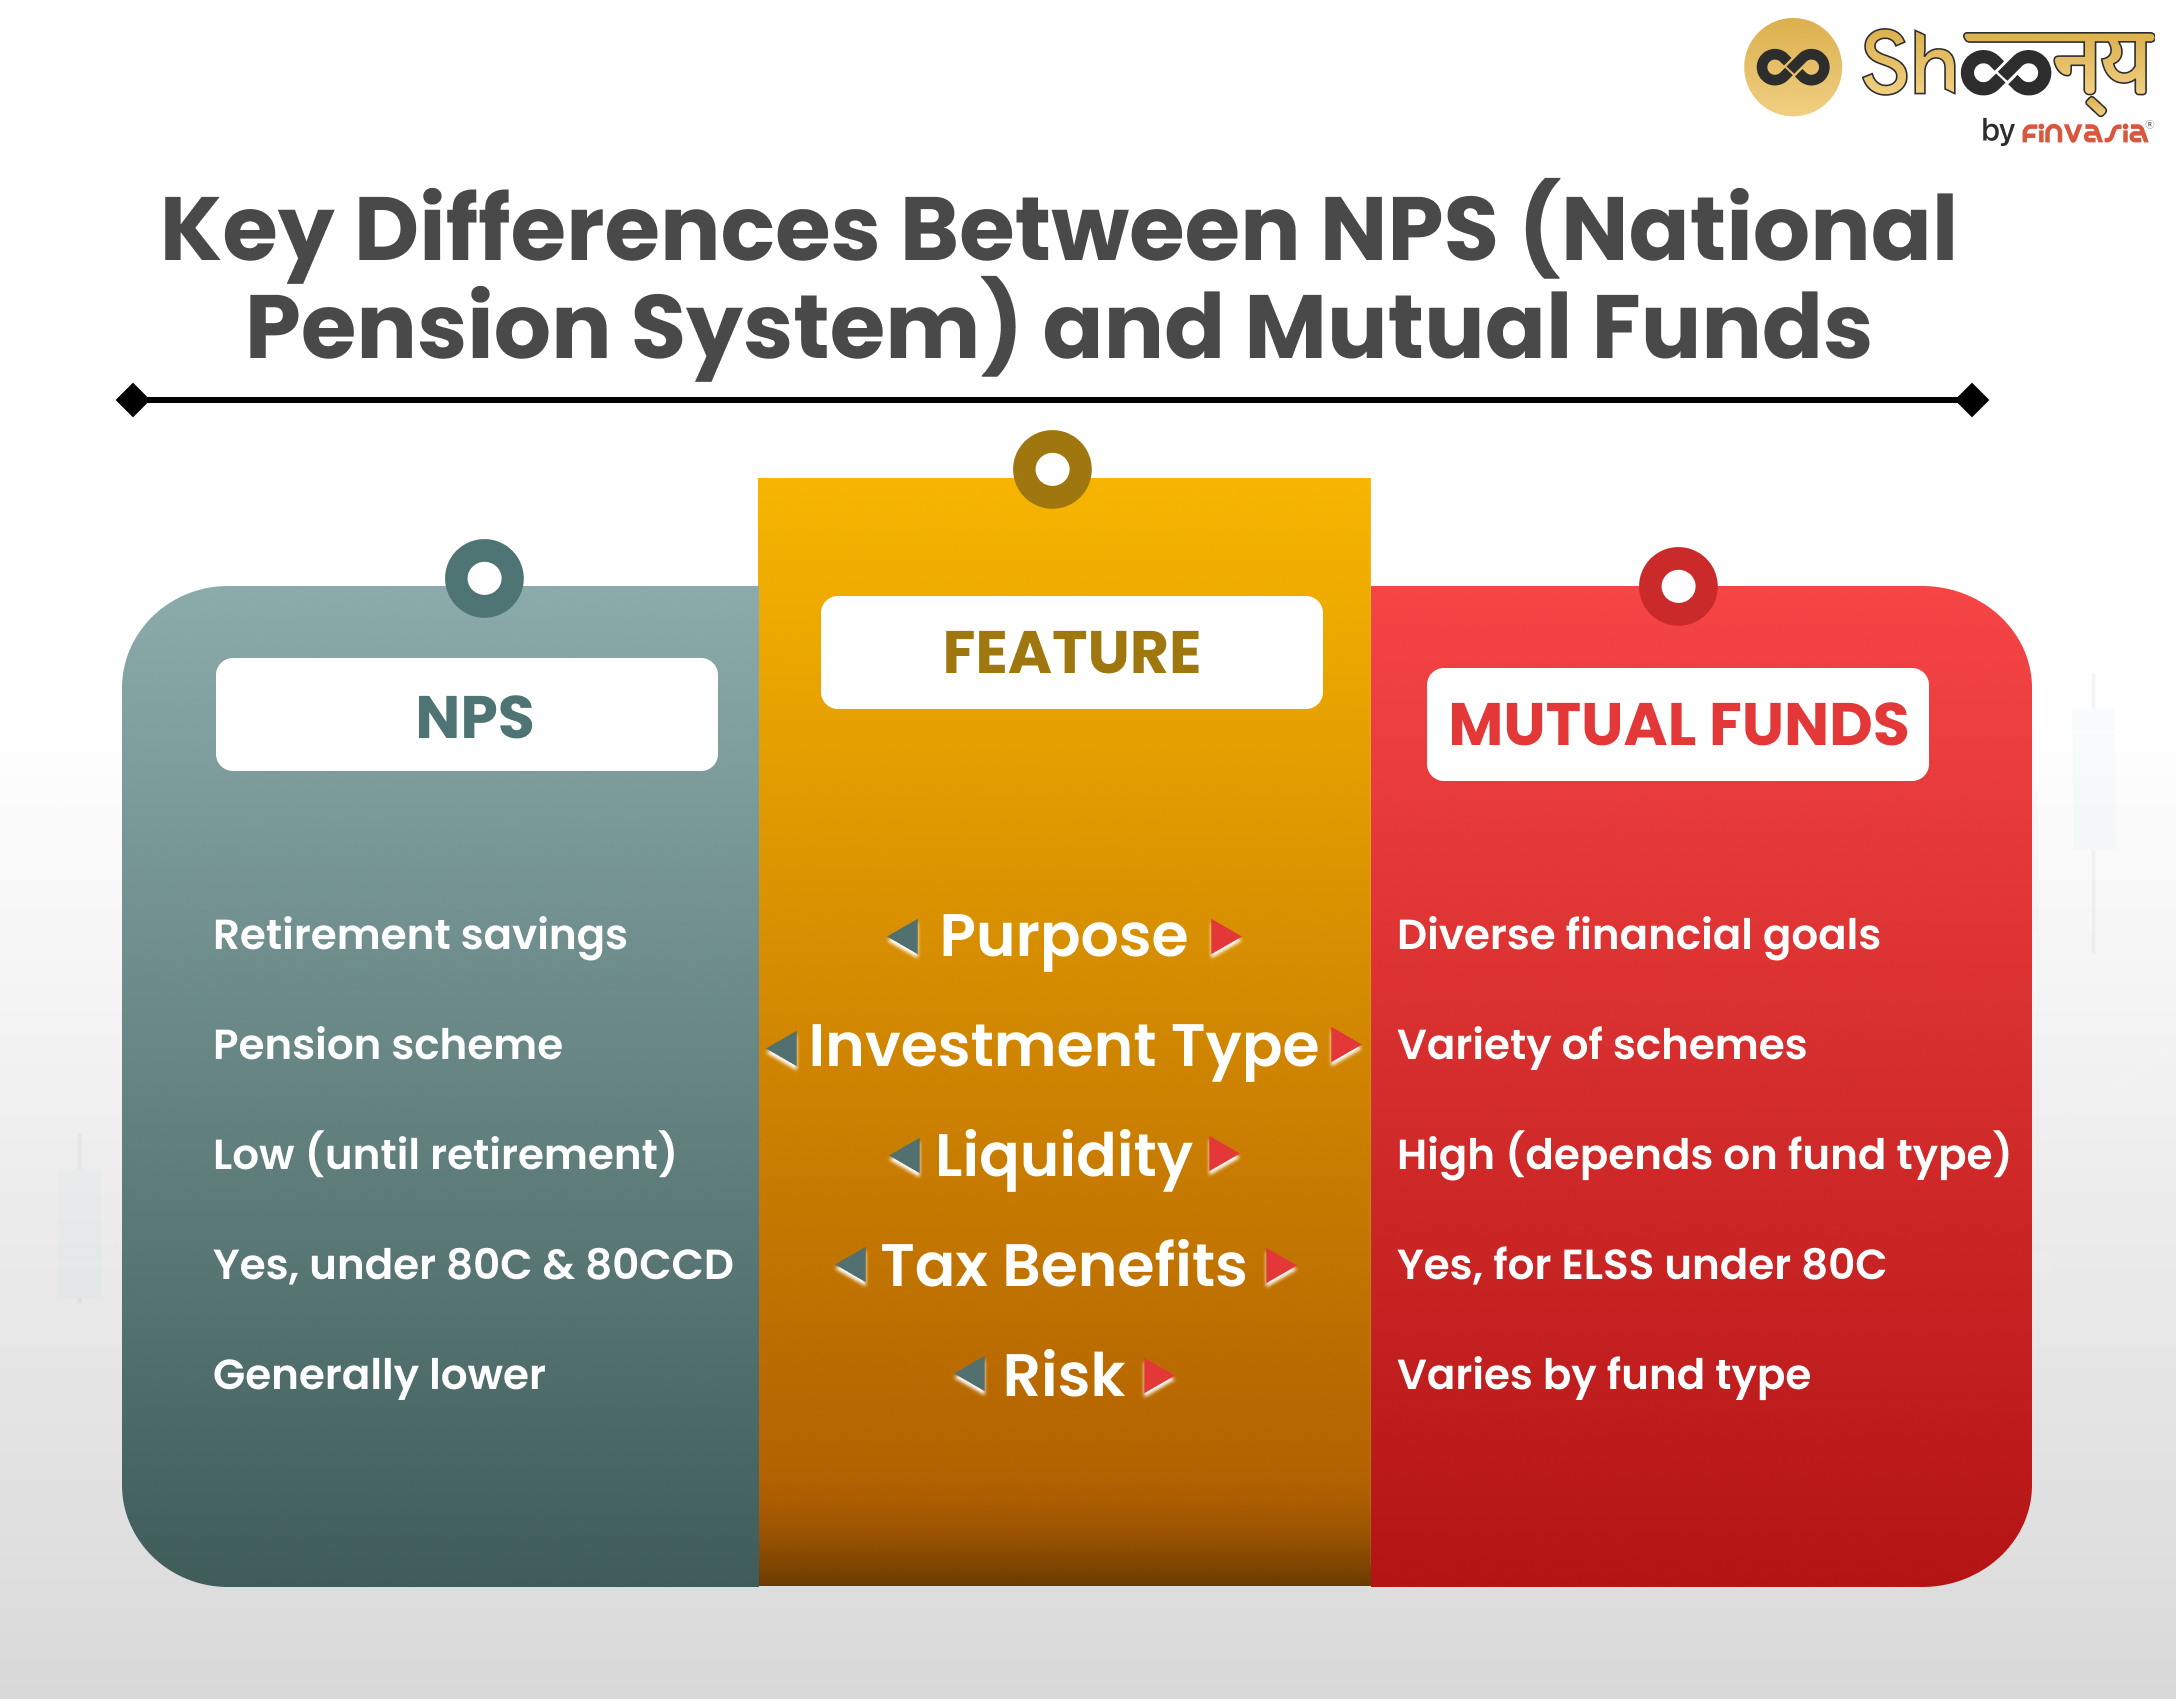 Key Differences Between NPS (National Pension System) and Mutual Funds
